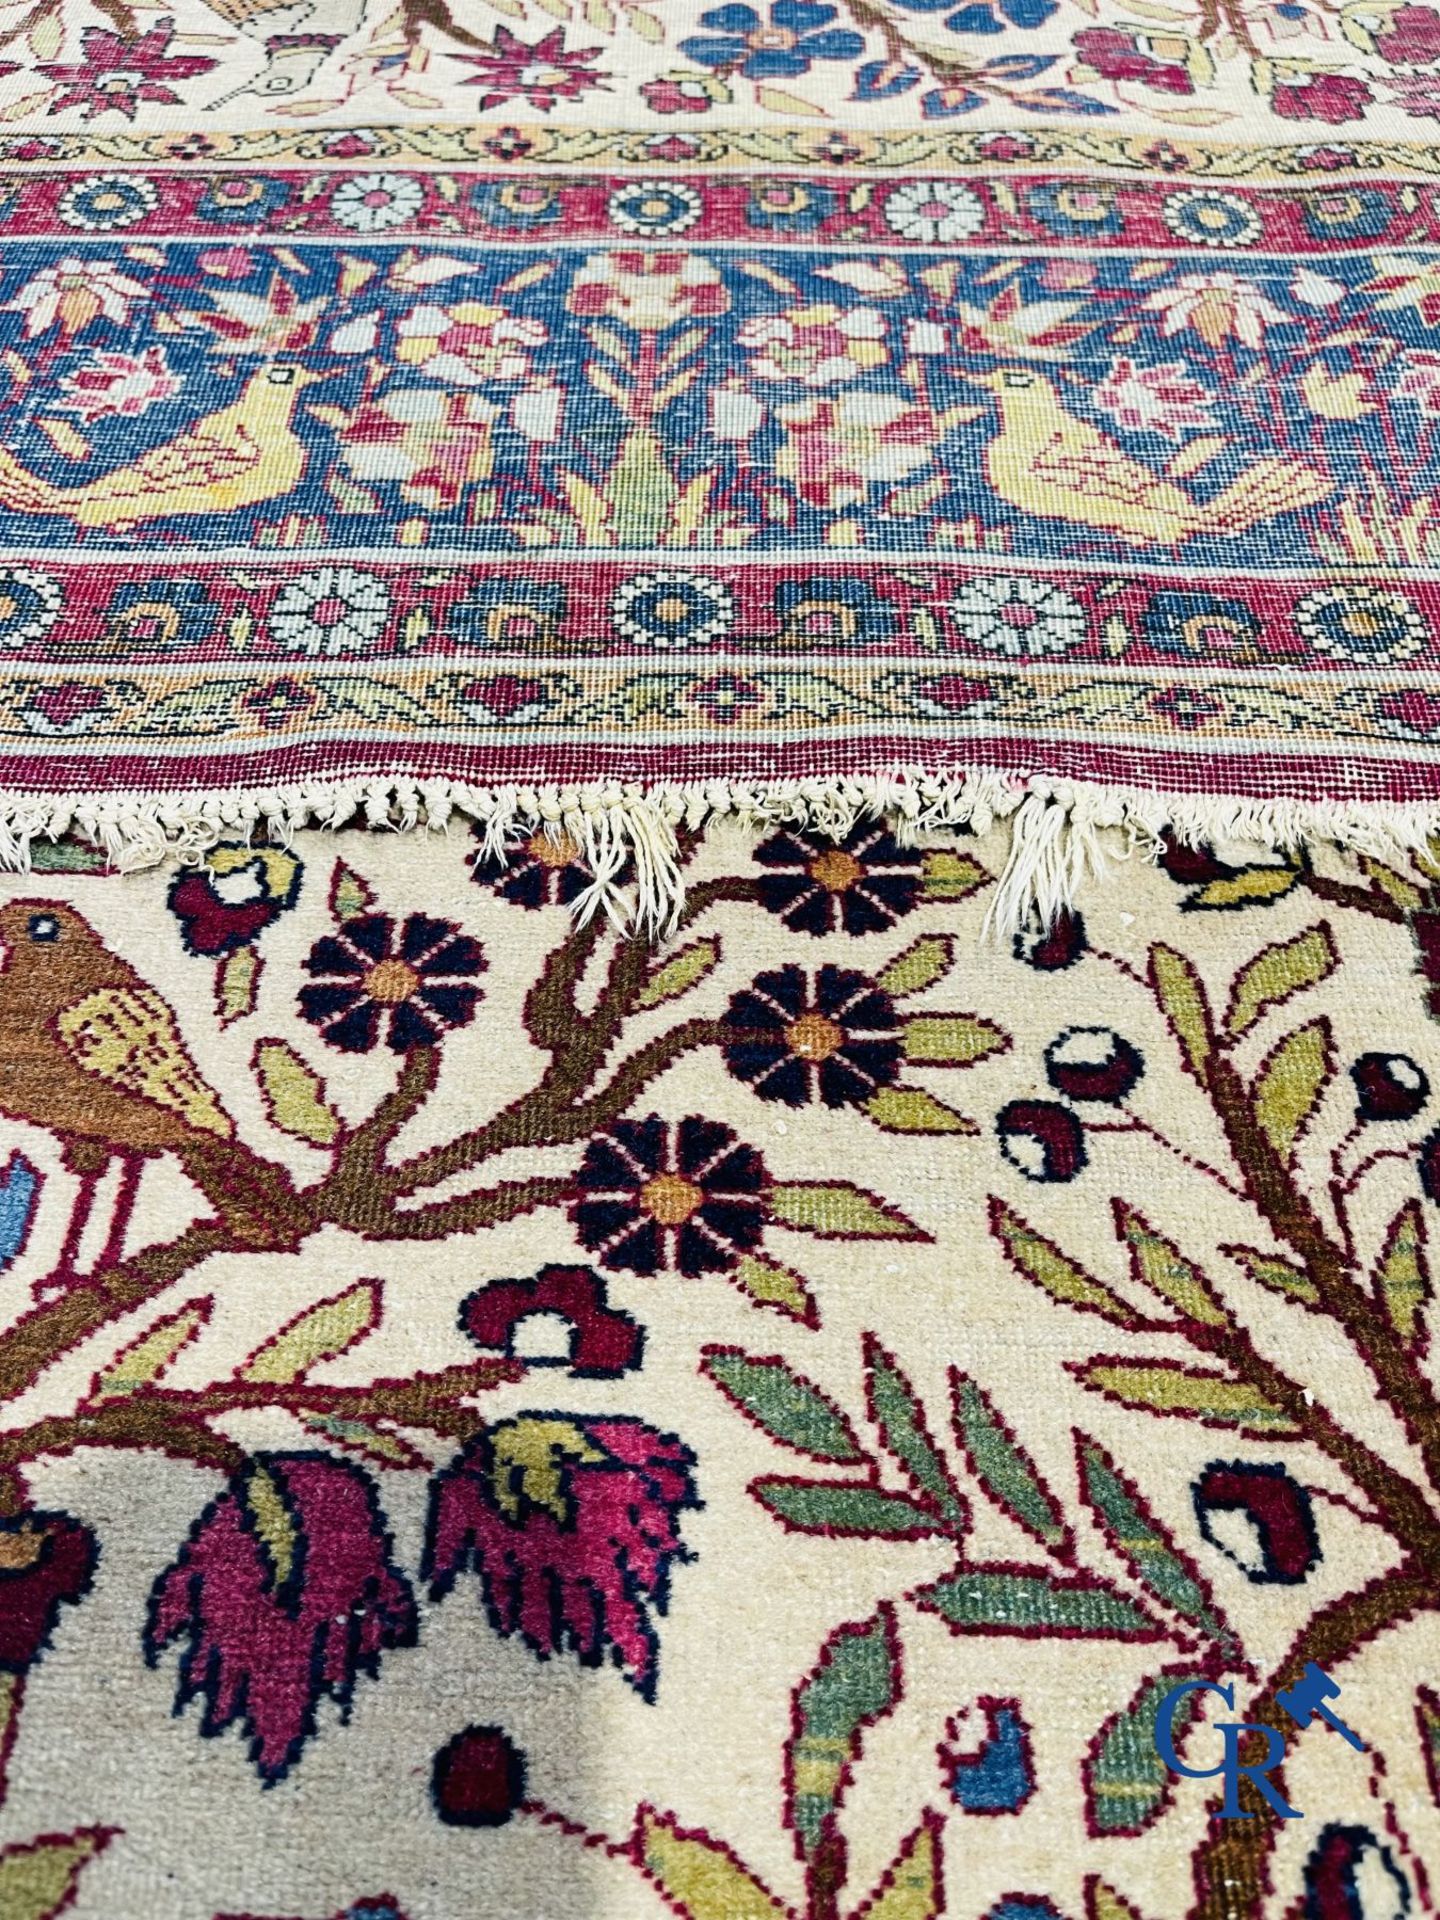 Oriental carpets: Antique oriental carpet with a decor of animals and birds in the forest. - Image 9 of 10